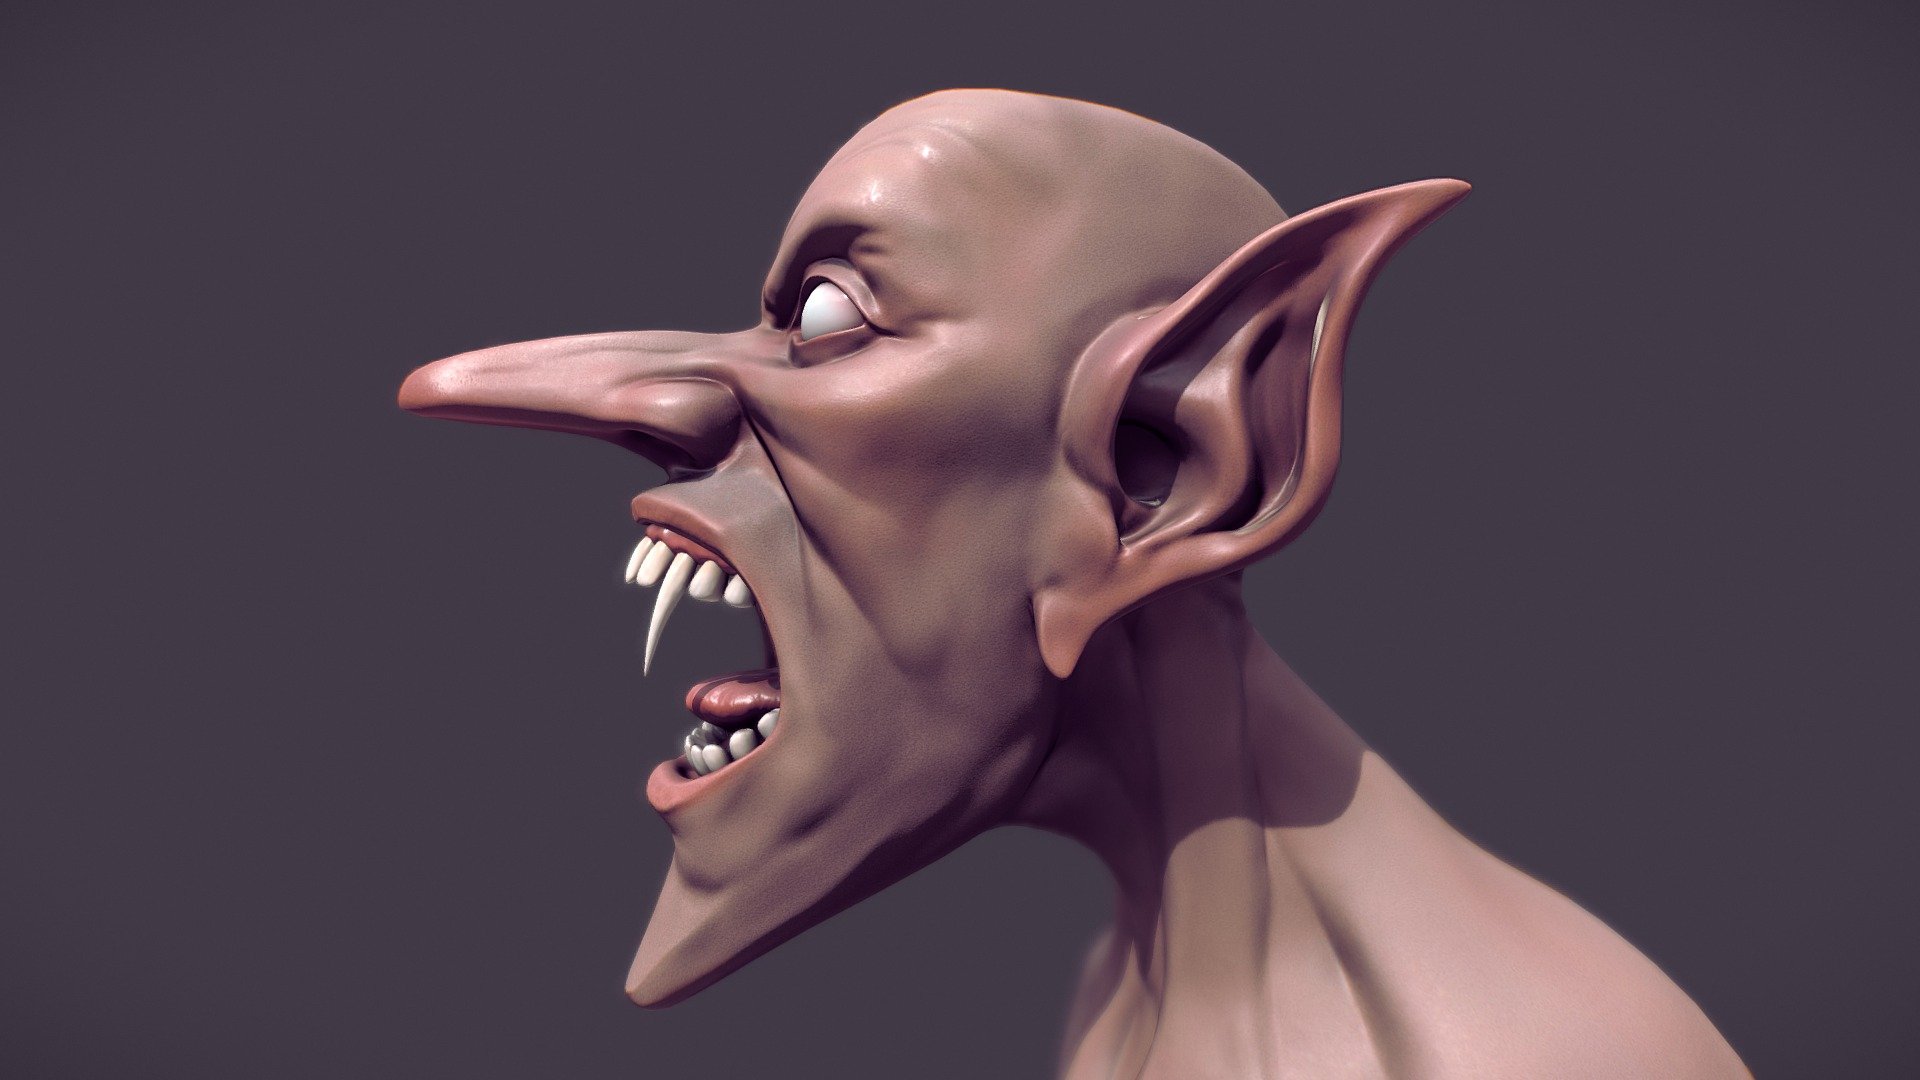 Personal project, bust of a stylized vampire with a puply feel.

This has been my first atempt at retopoligizing one of my sculpts as well as trying to create my own skintexture from scratch.

It's been an immense and rewarding learning experience!
Created with Zbrush and 3D Coat 3d model